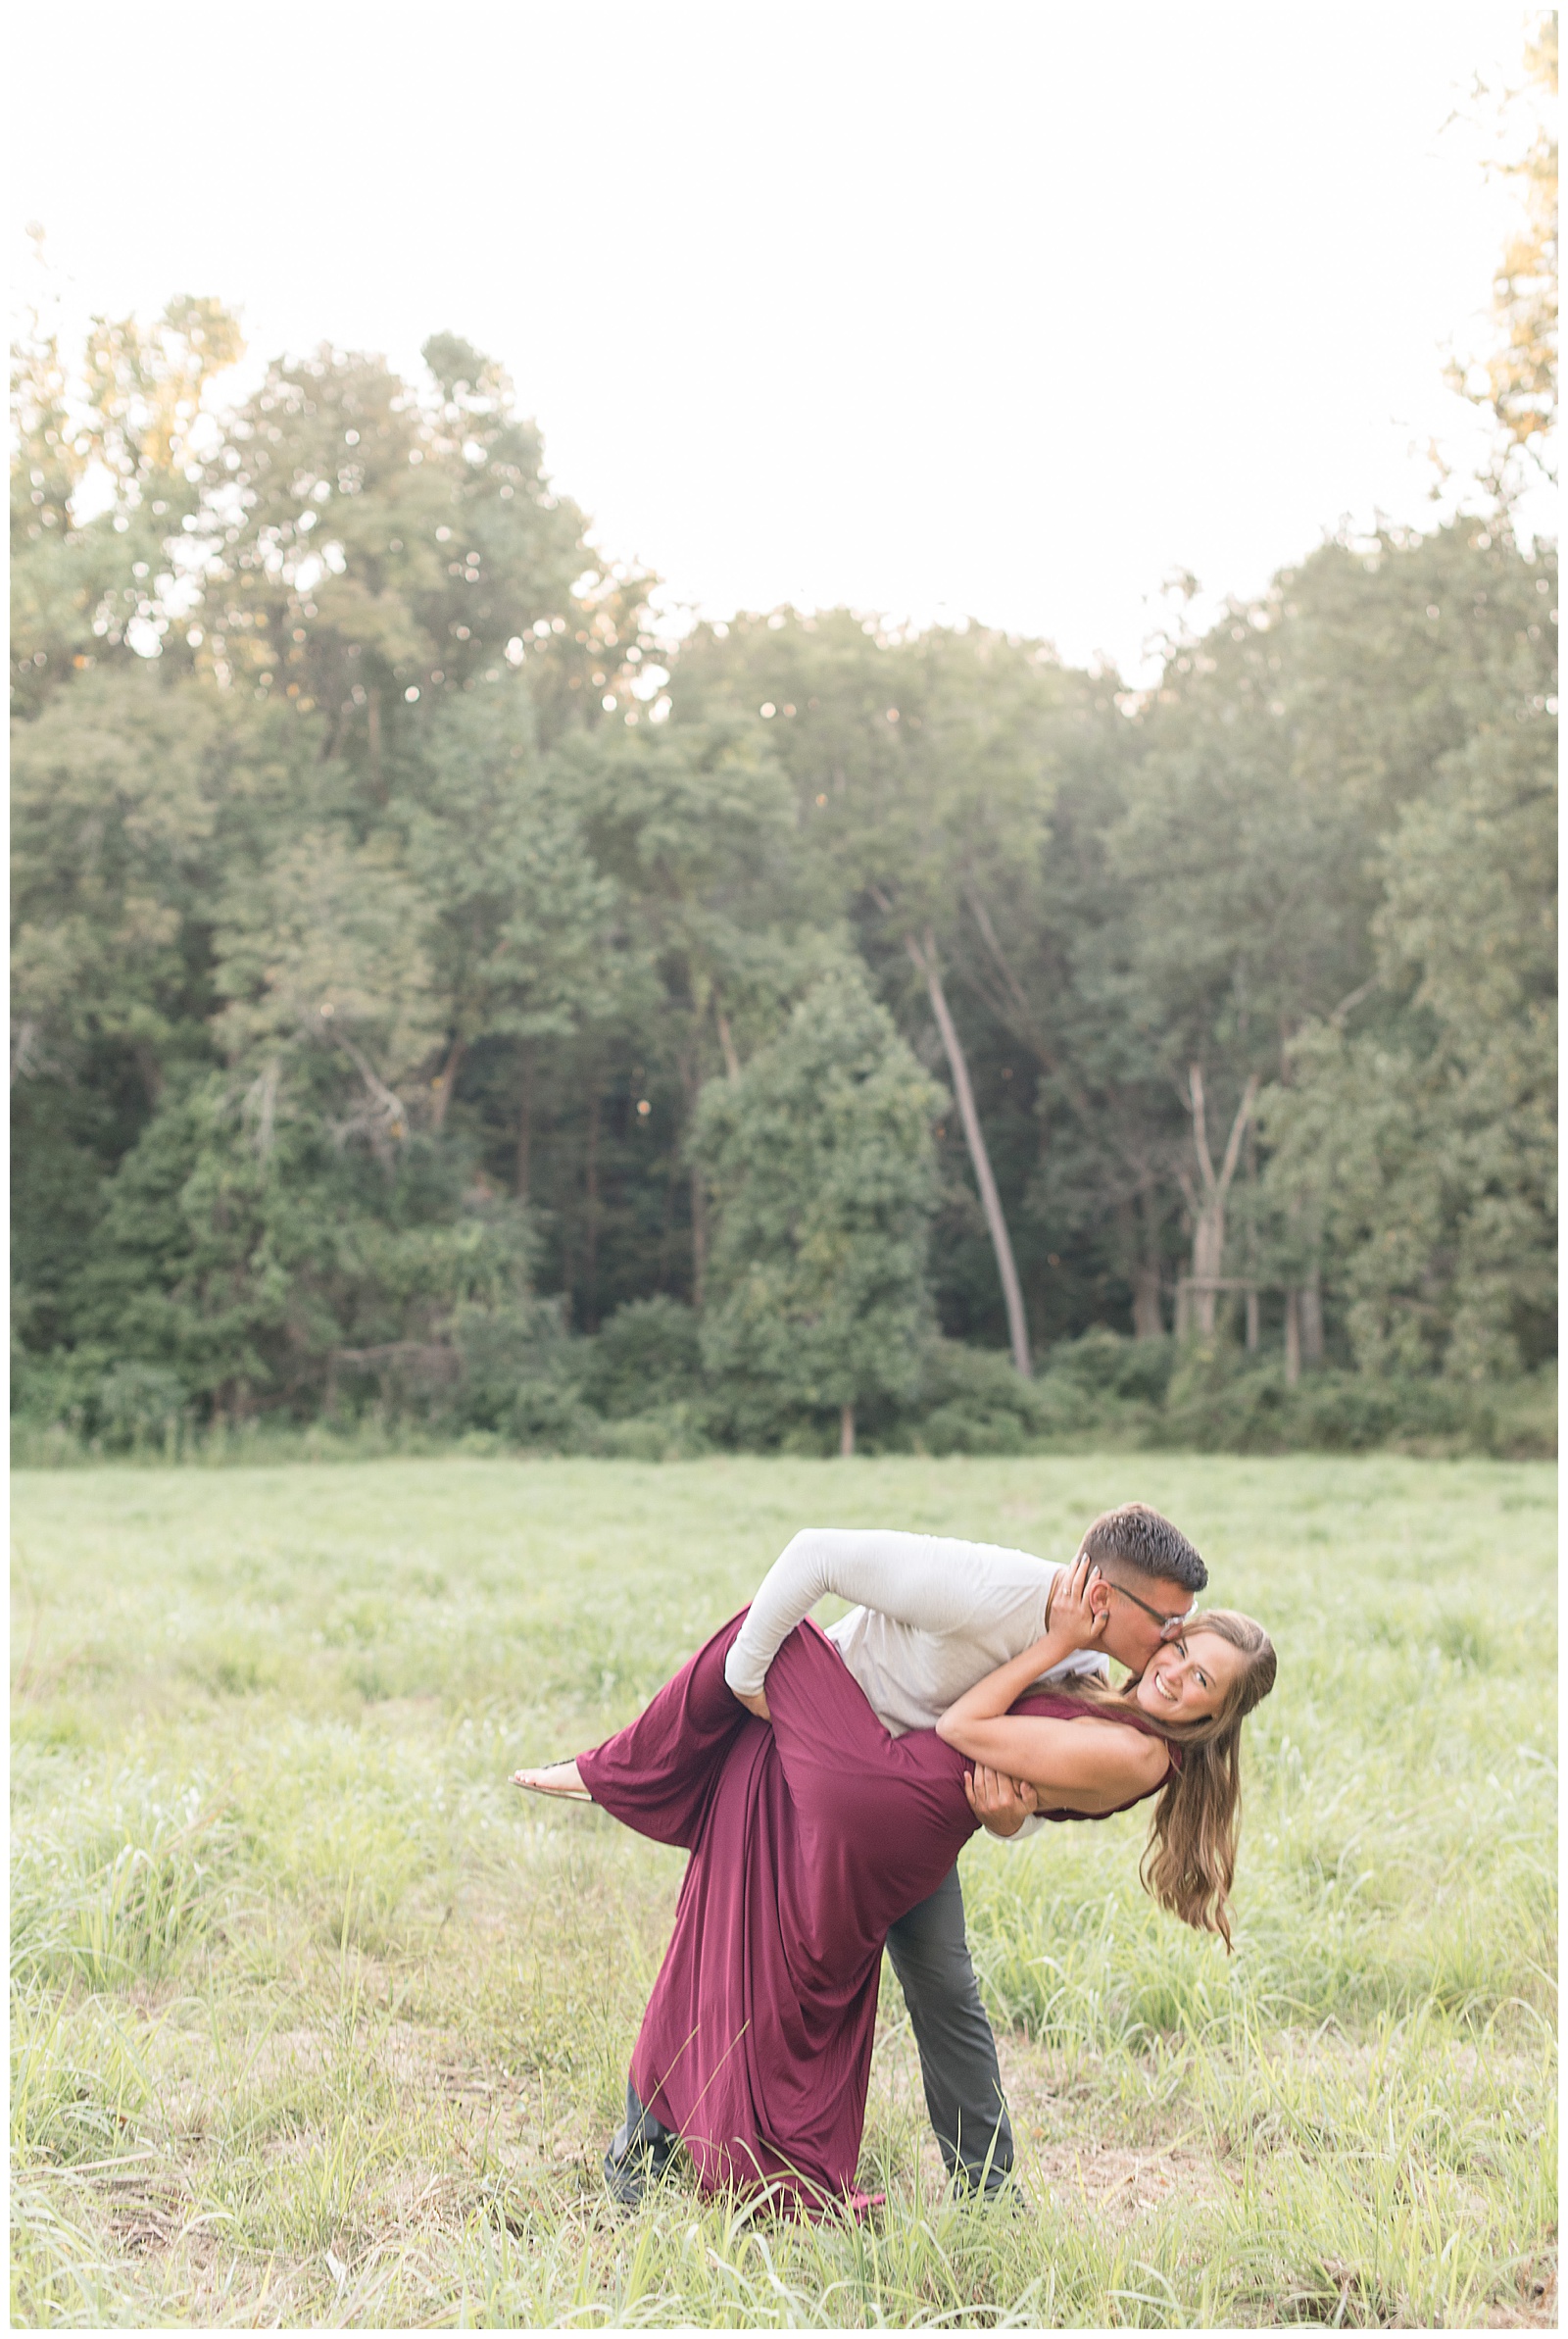 couple is standing in grass field with trees behind them and the guy is dipping the girl backwards and kissing her on her right cheek and holding her left leg up as the girl is wrapping her arms around the guy and looking at the camera and smiling at Hibernia County Park in Chester County, PA